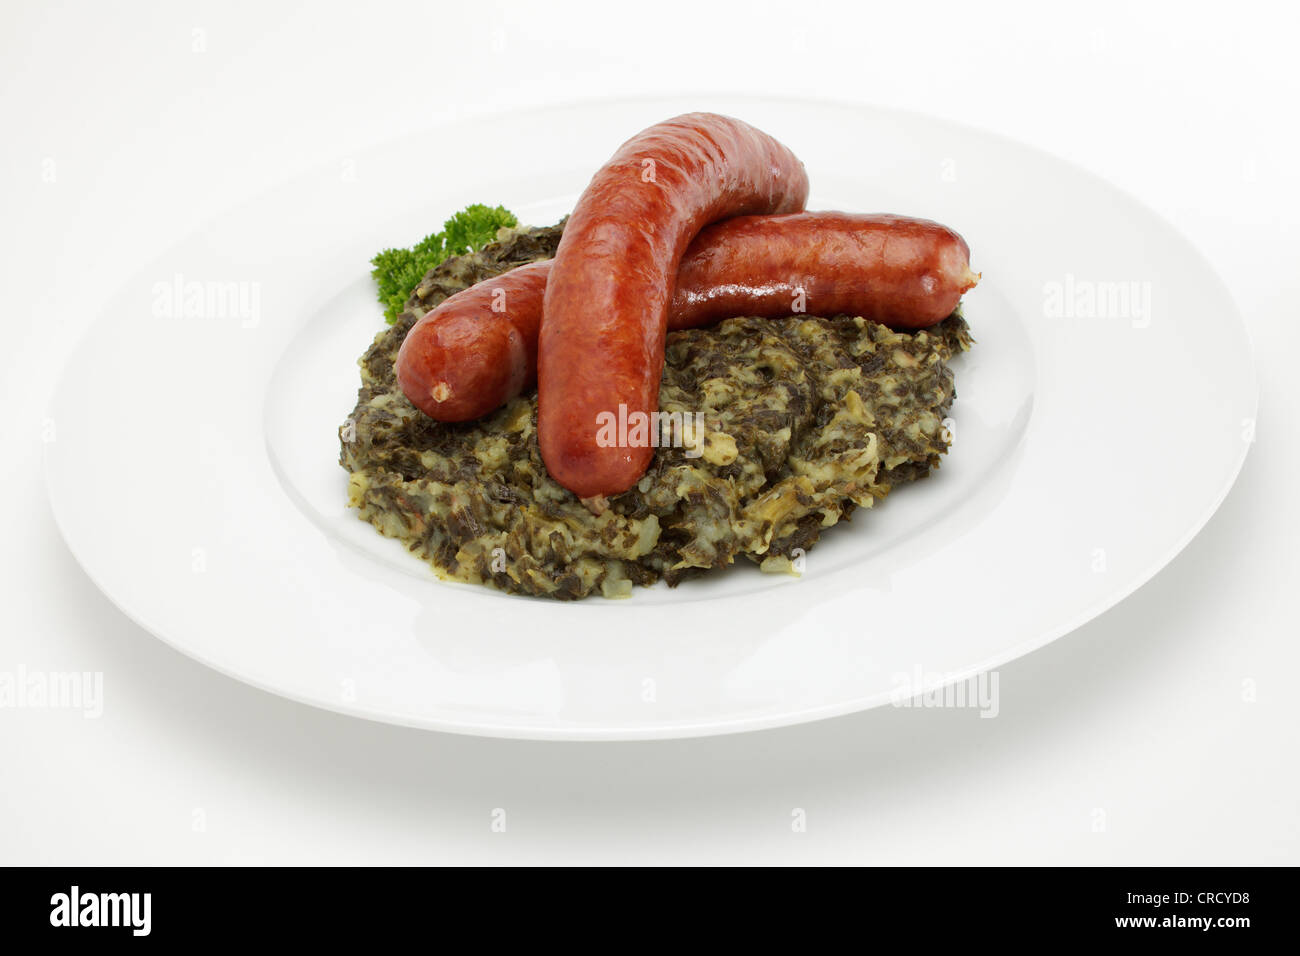 Mettwurst smoked sausages on green cabbage Stock Photo